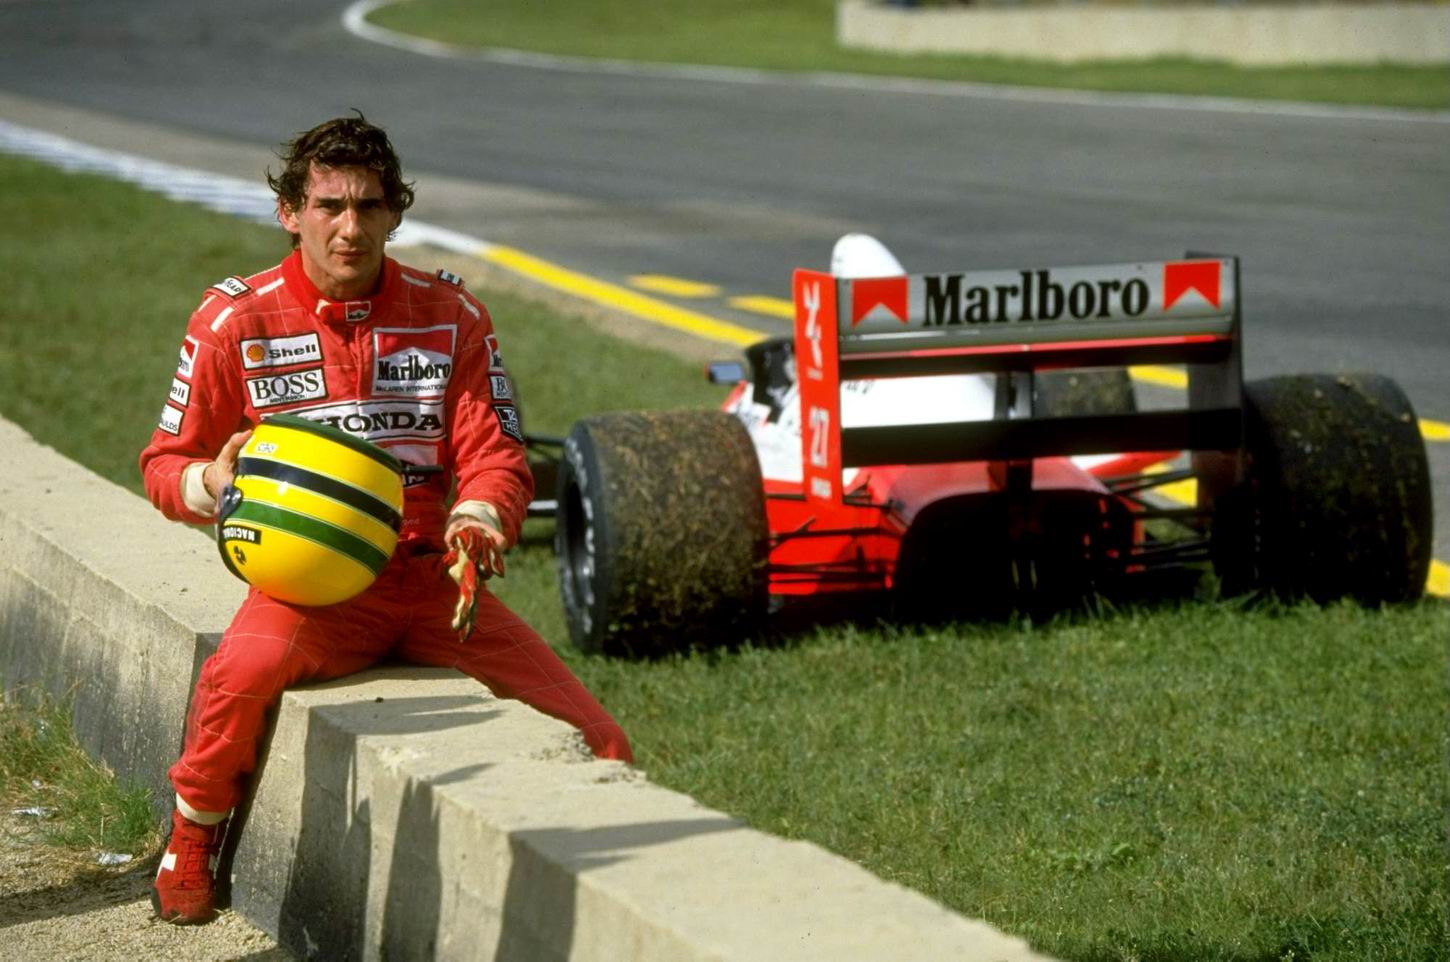 Ayrton Senna would have been 55 today, happy birthday and rest in peace to my idol and inspiration. 